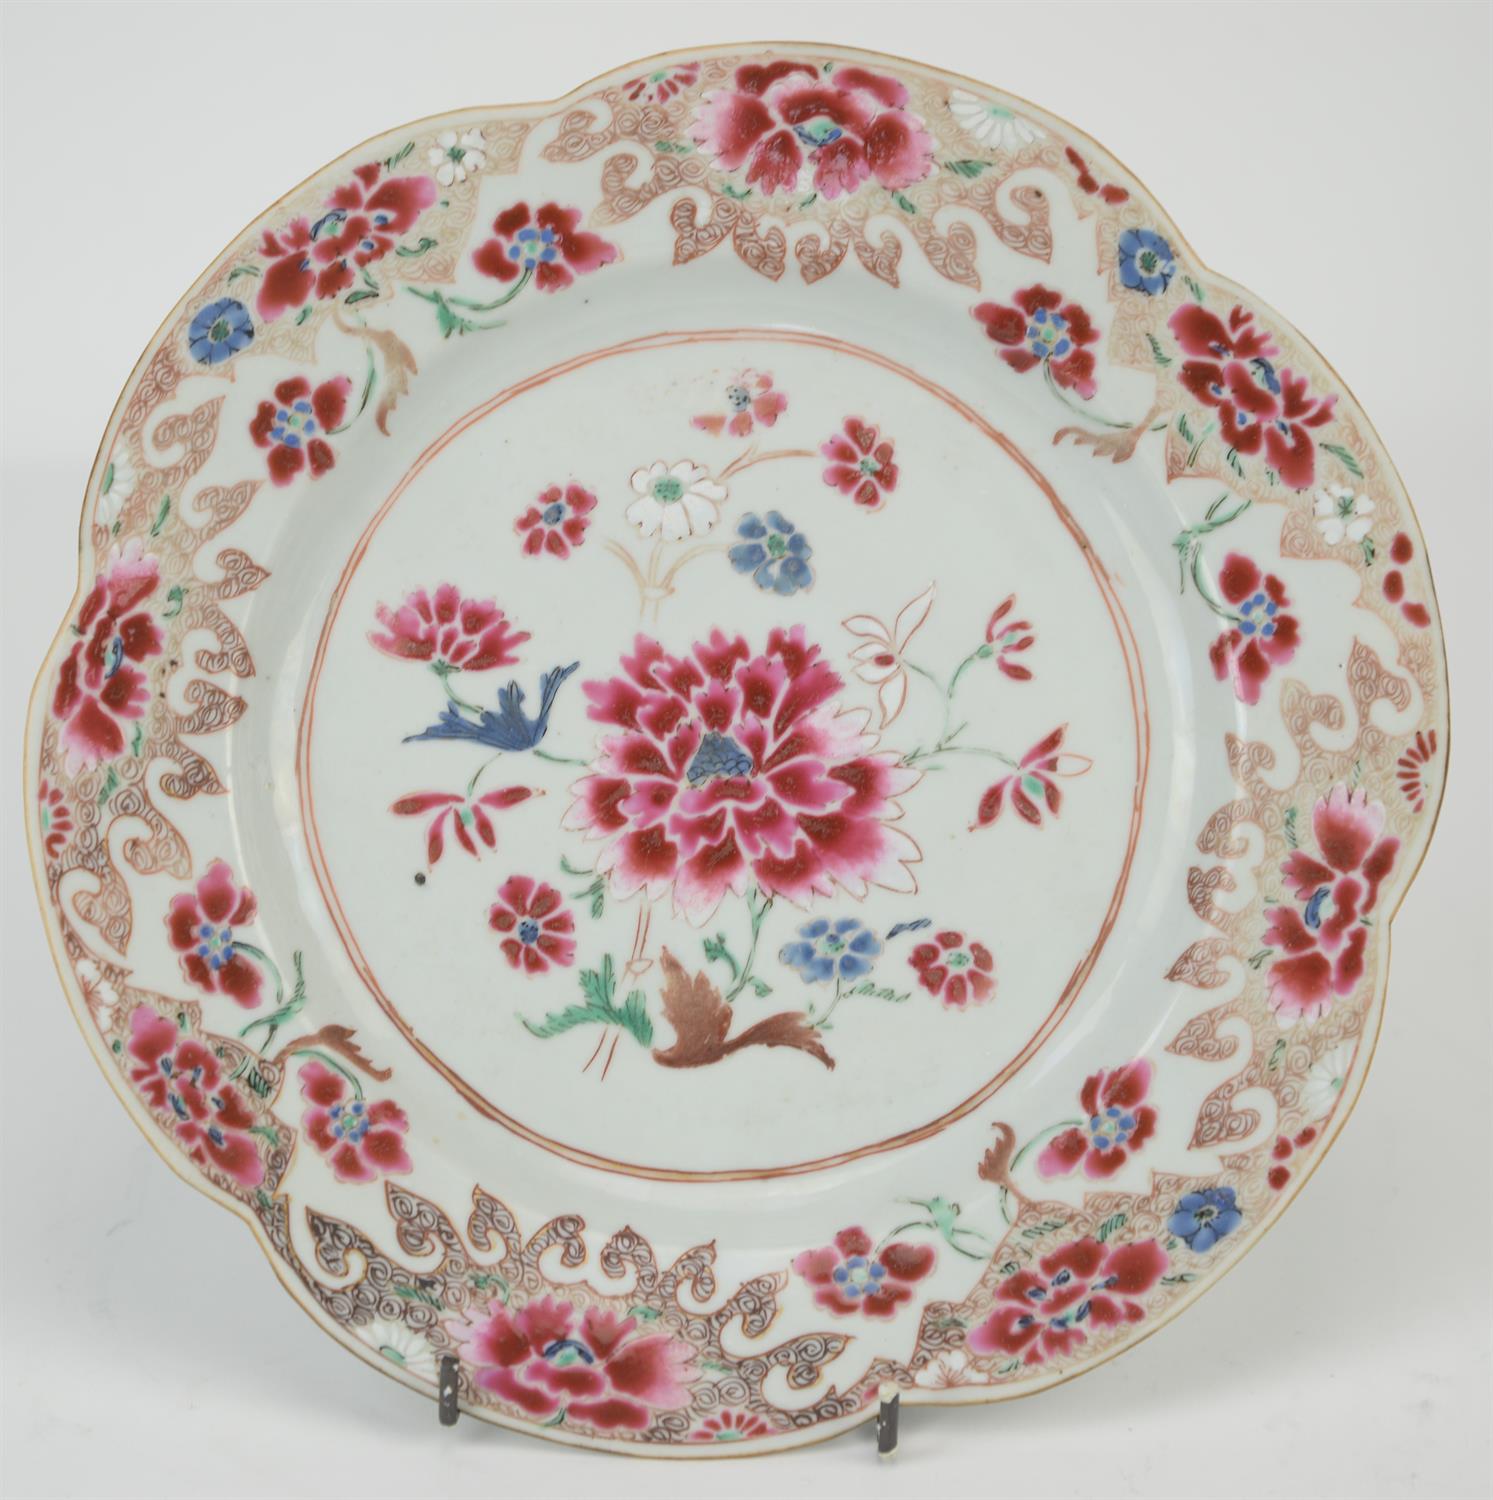 Eight famille rose dishes; each one decorated with floral designs and about 22.5 cm diameter - Image 10 of 14